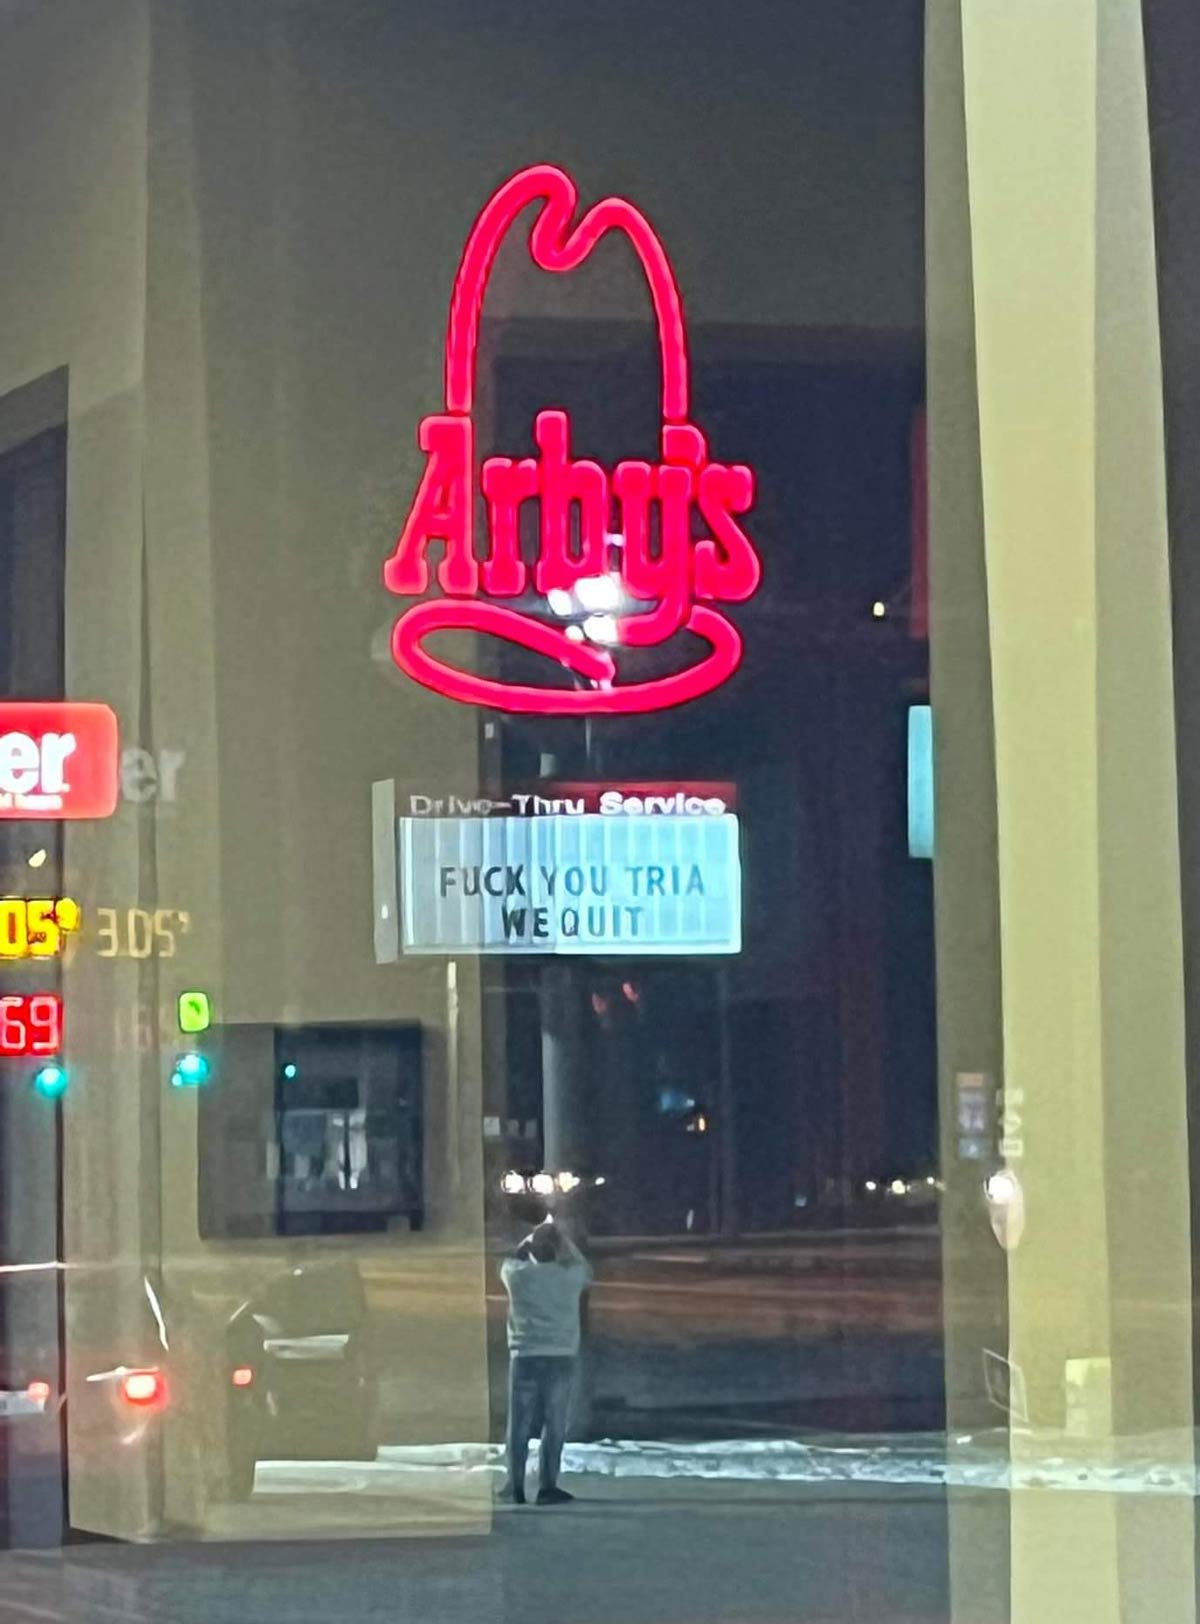 Welp no Arby's available today in Battle Creek, Mi